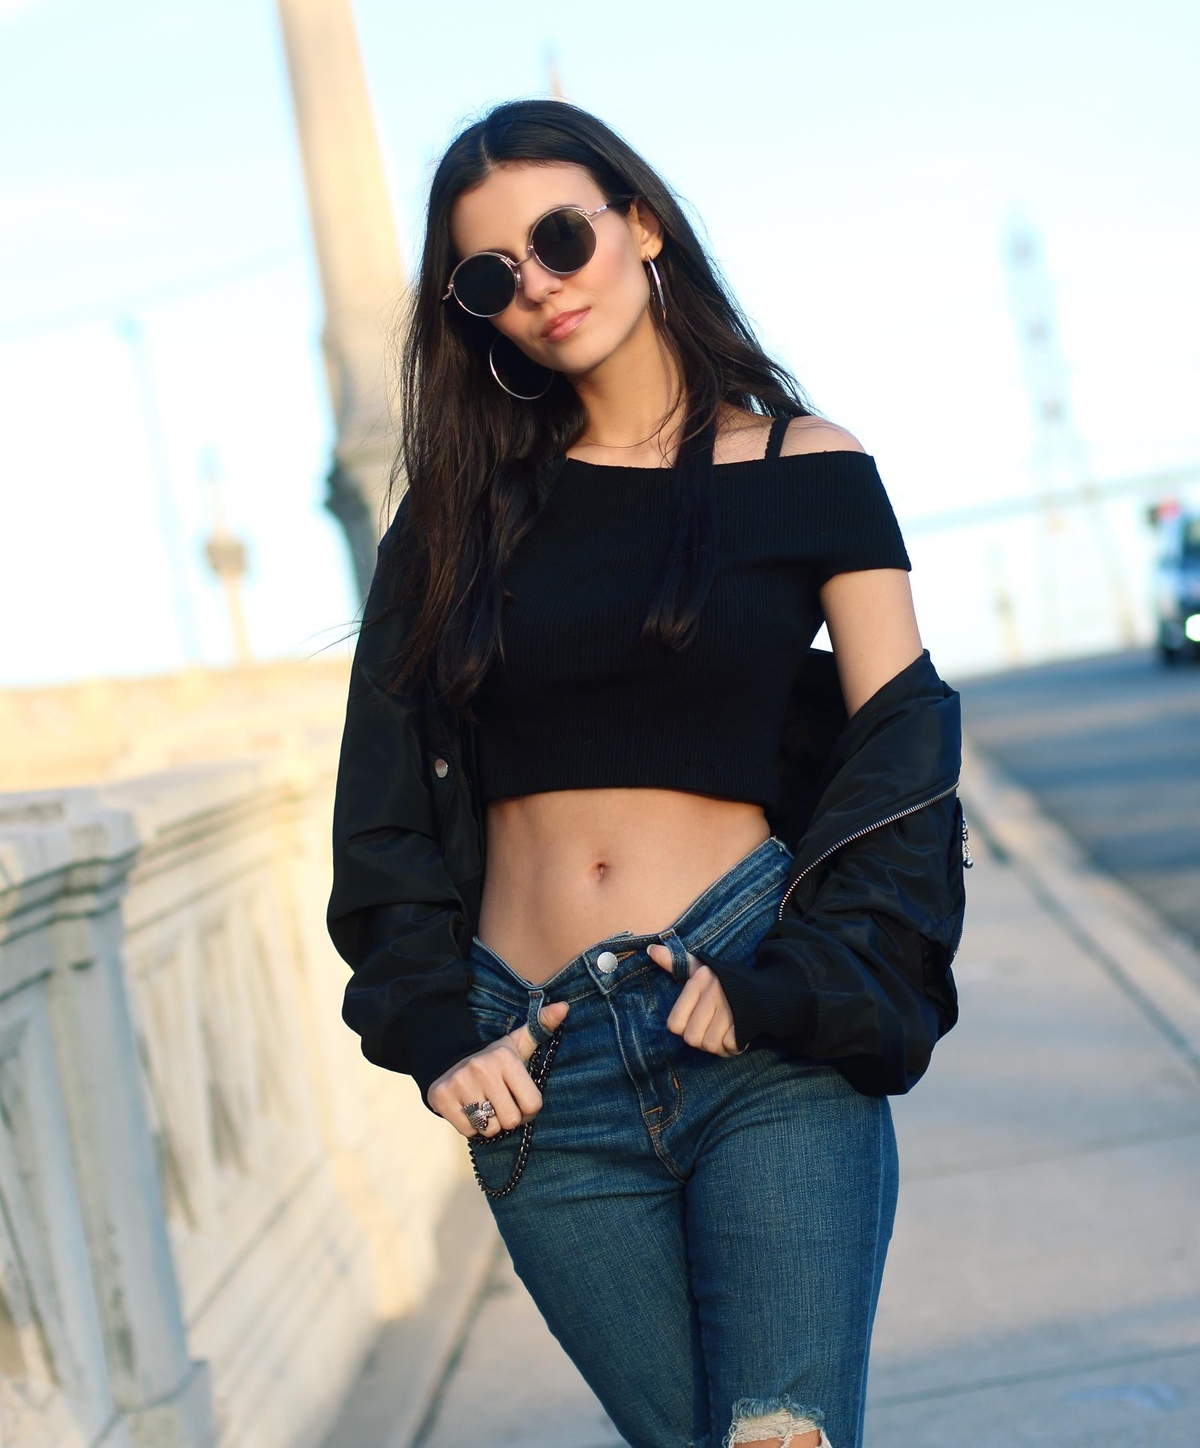 Victoria Justice Women Singer Actress Brunette Jeans Urban Torn Jeans Latinas Women With Shades Crop 1200x1448